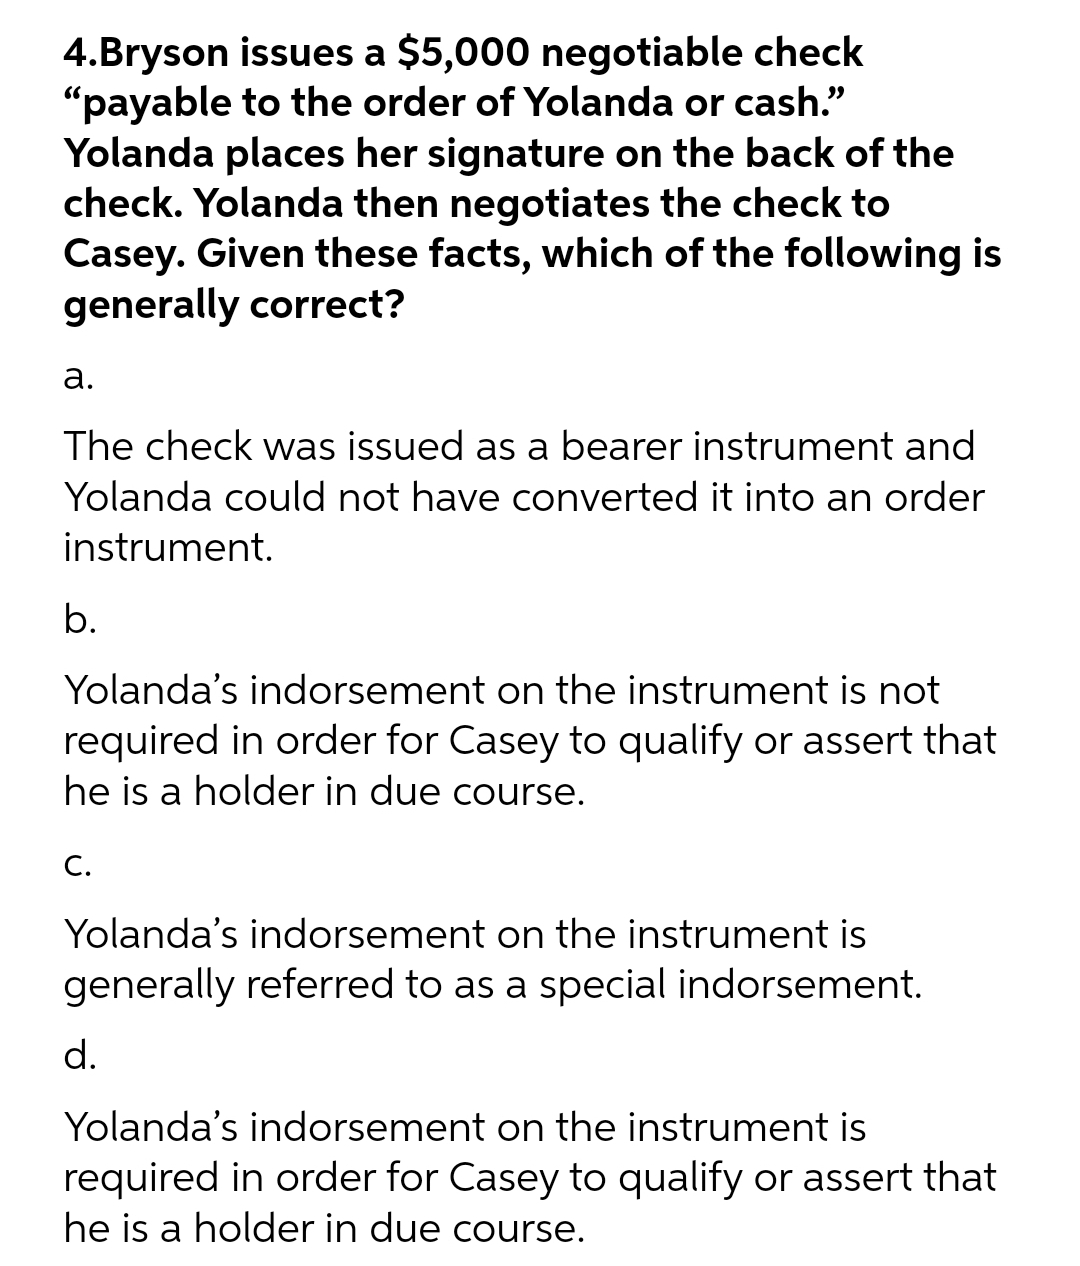 4.Bryson issues a $5,000 negotiable check
"payable to the order of Yolanda or cash."
Yolanda places her signature on the back of the
check. Yolanda then negotiates the check to
Casey. Given these facts, which of the following is
generally correct?
а.
The check was issued as a bearer instrument and
Yolanda could not have converted it into an order
instrument.
b.
Yolanda's indorsement on the instrument is not
required in order for Casey to qualify or assert that
he is a holder in due course.
С.
Yolanda's indorsement on the instrument is
generally referred to as a special indorsement.
d.
Yolanda's indorsement on the instrument is
required in order for Casey to qualify or assert that
he is a holder in due course.
